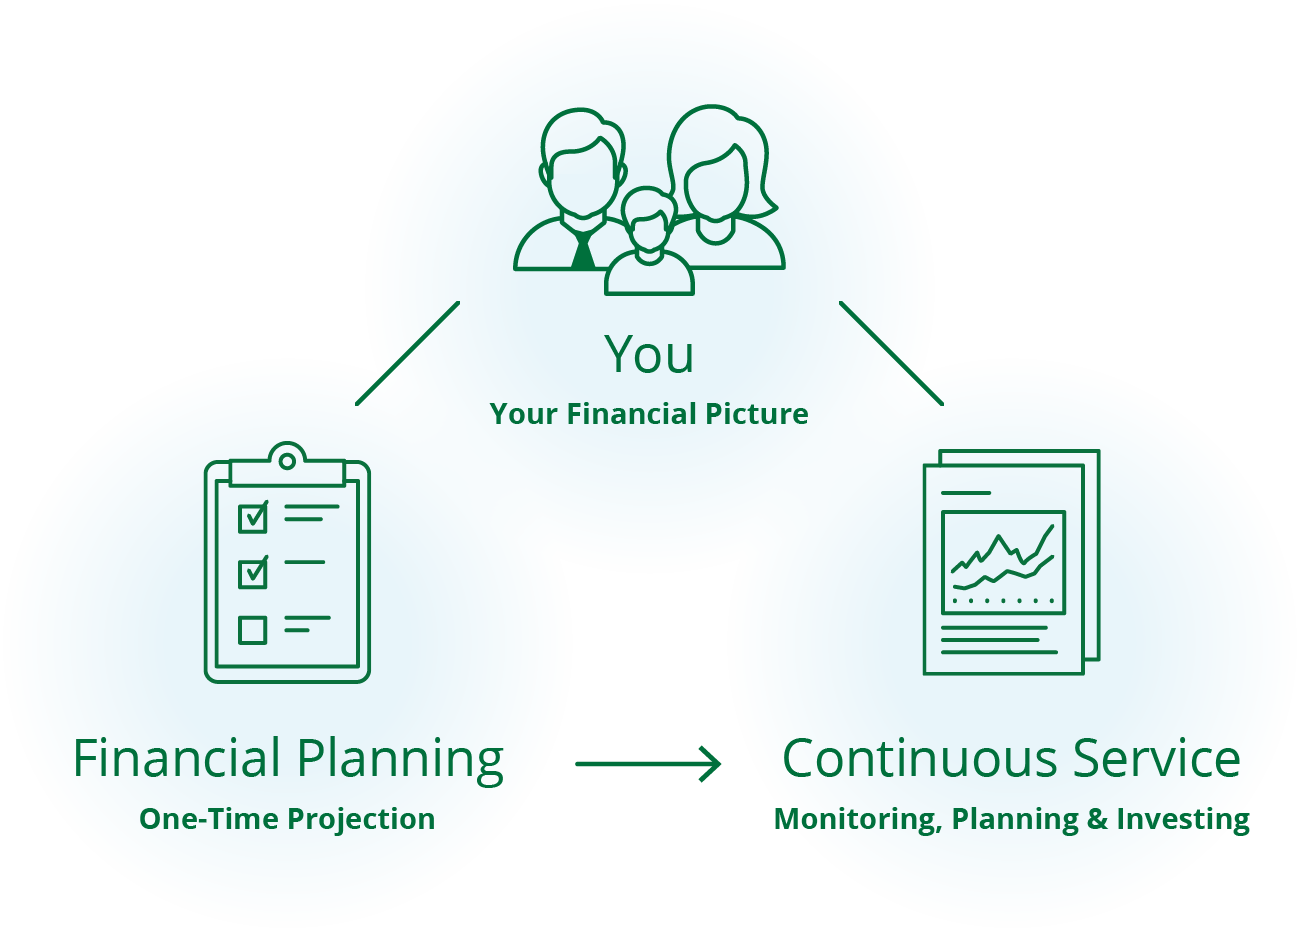 Our Services: Financial Planning and Continuous Service